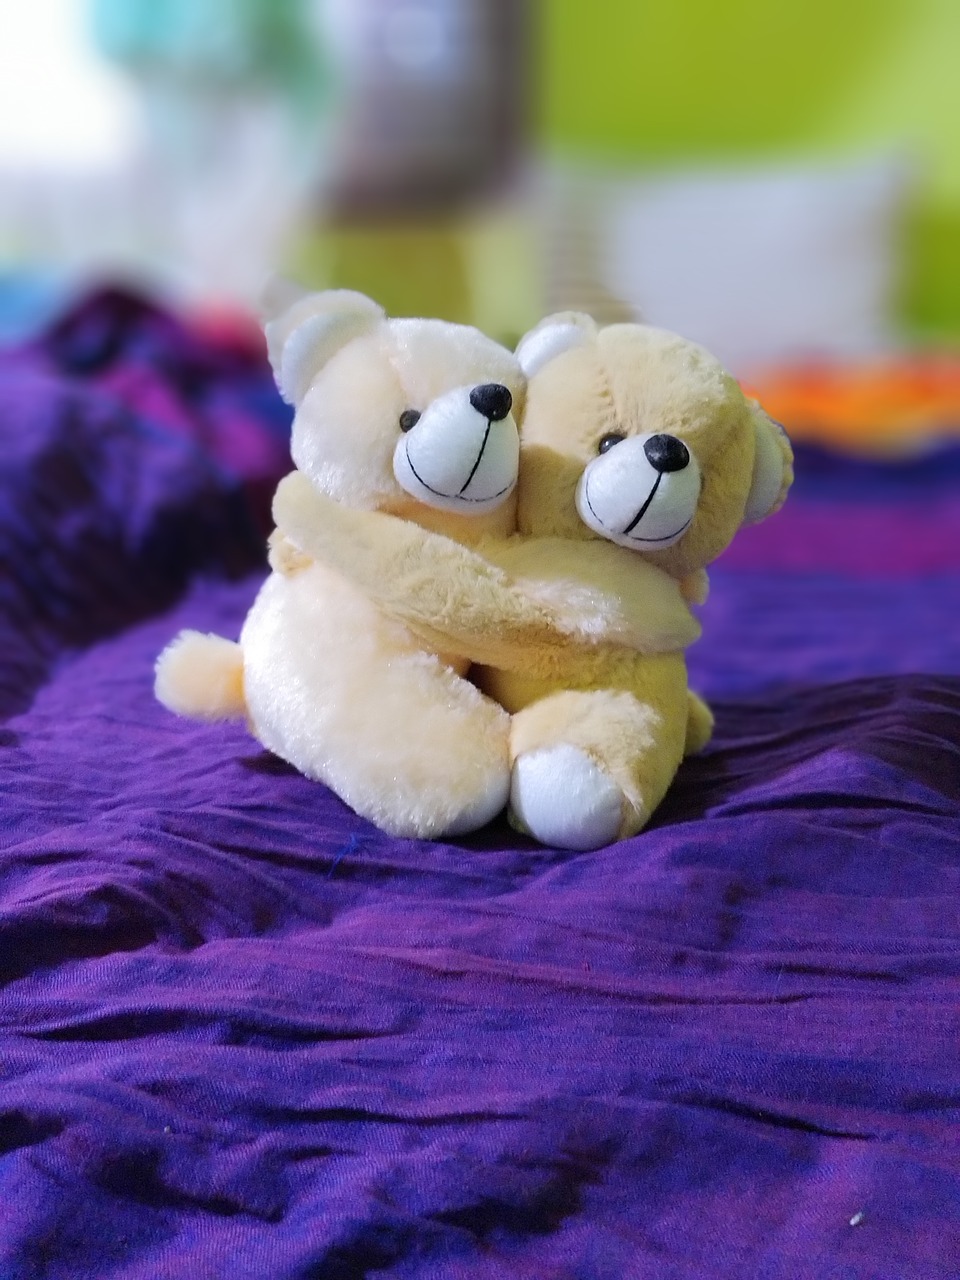 Download free photo of Couple teddy, cute, love, bear, romantic ...